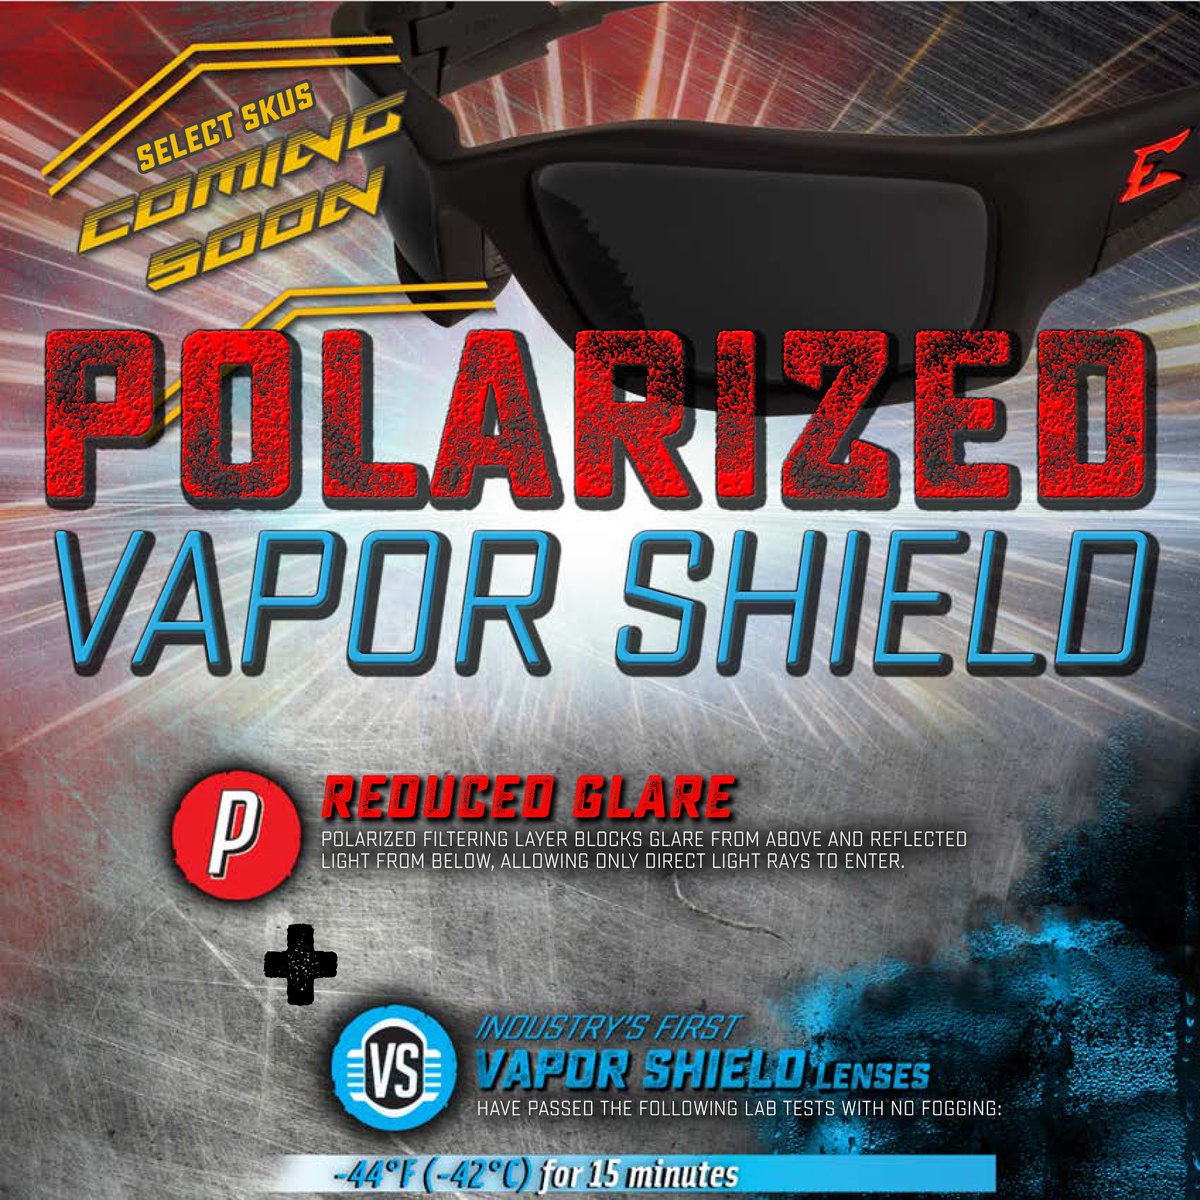 *MASSIVE NEWS* Eliminate fog while fighting glare with our first ever polarized vapor shield lenses! It's odd to think of a safety glass as state-of-the-art, but that's exactly what we created! #edgeeyewear #safetyglass #sunglass #dontfogup #gamechanger #safety #worksafeplaysafe